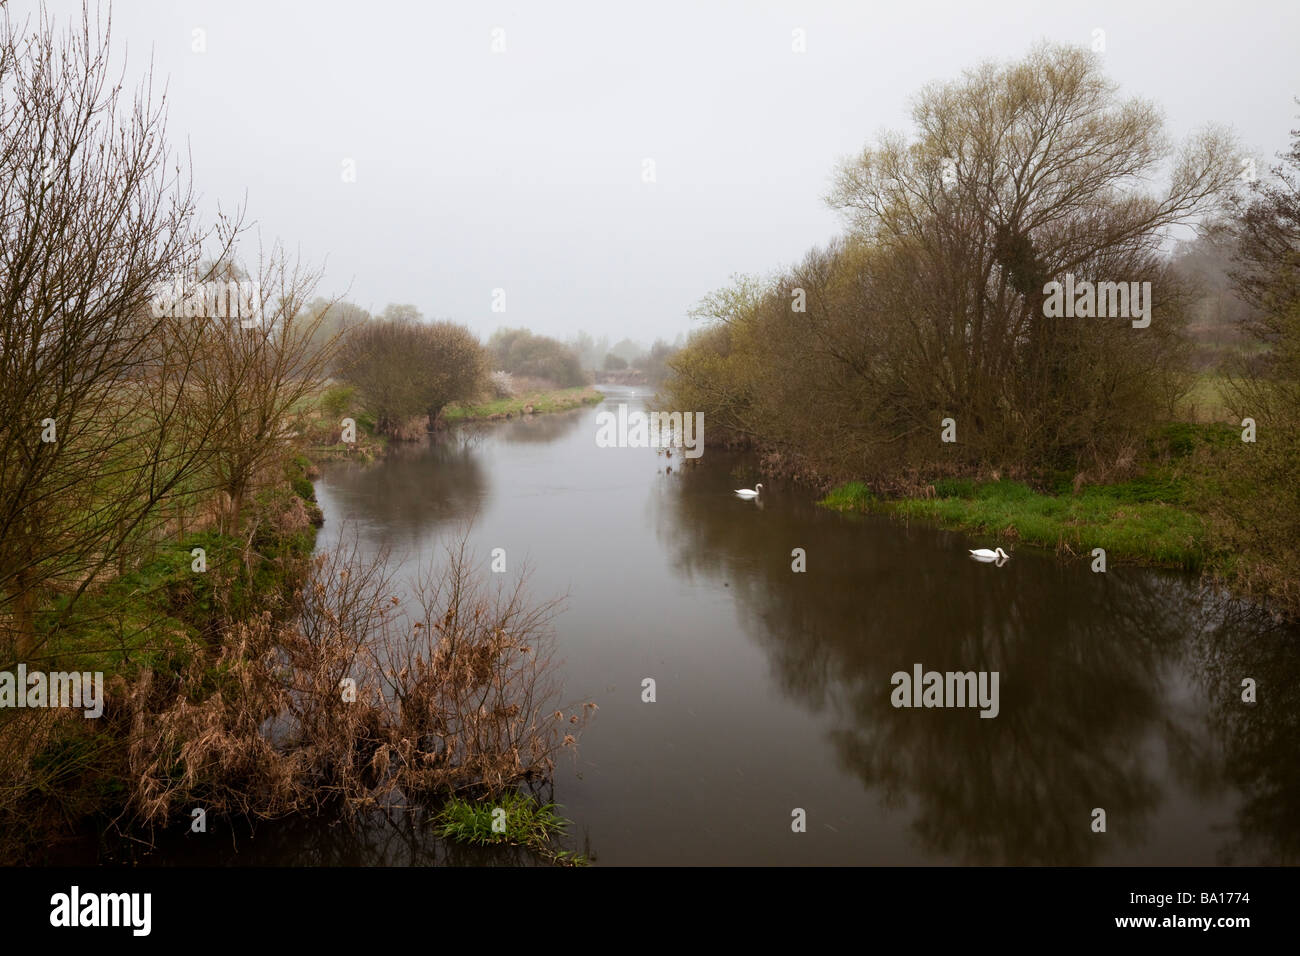 River Stour Wimborne Near Pamphill on misty April morning with swans and reflections of trees and bushes. Stock Photo